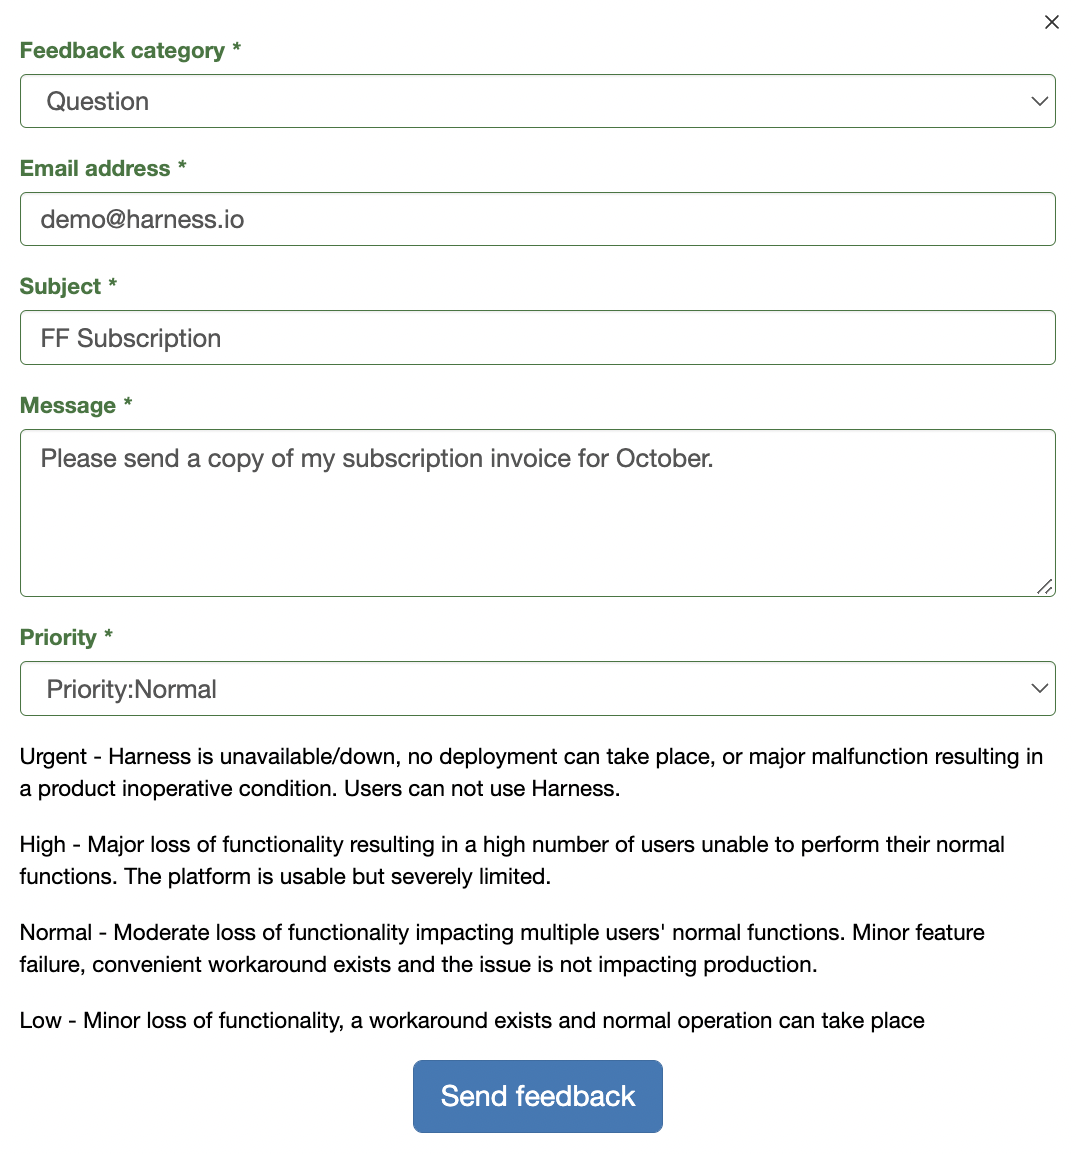 An example of the feedback form for requesting a subscription invoice.